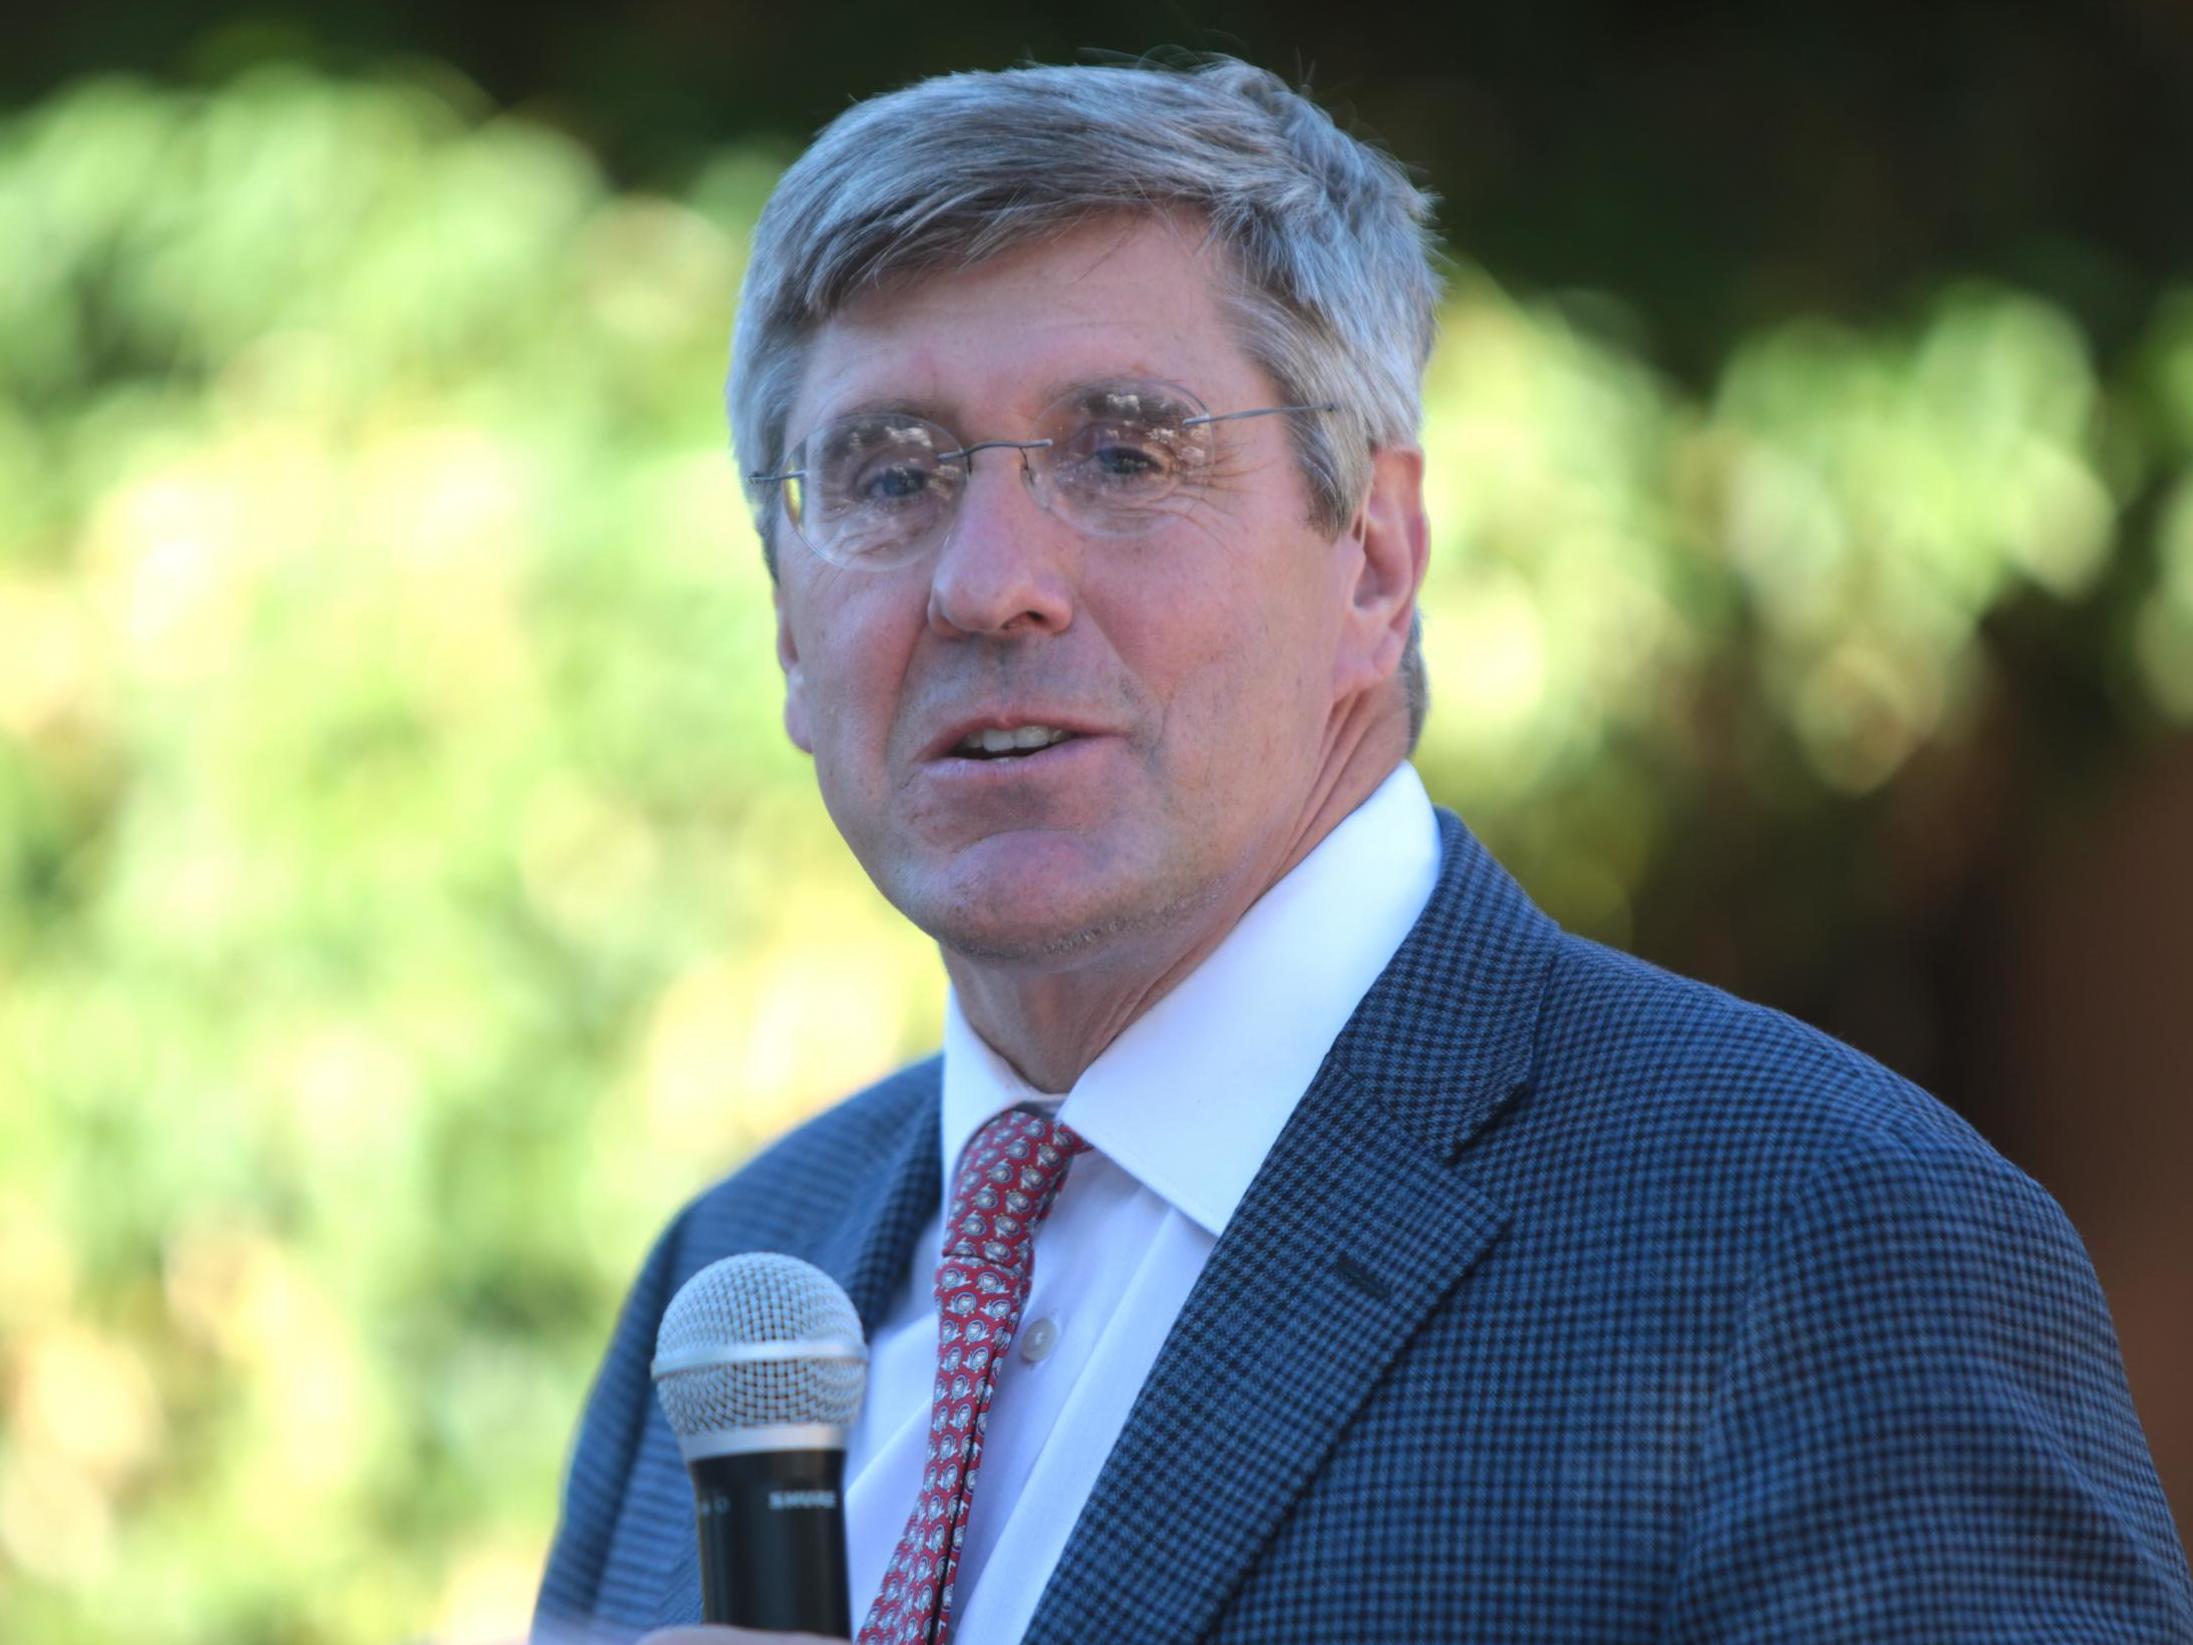 Donald Trump's fed nominee, Stephen Moore proposed a "no women" rule for men's college basketball games in one of the columns he wrote